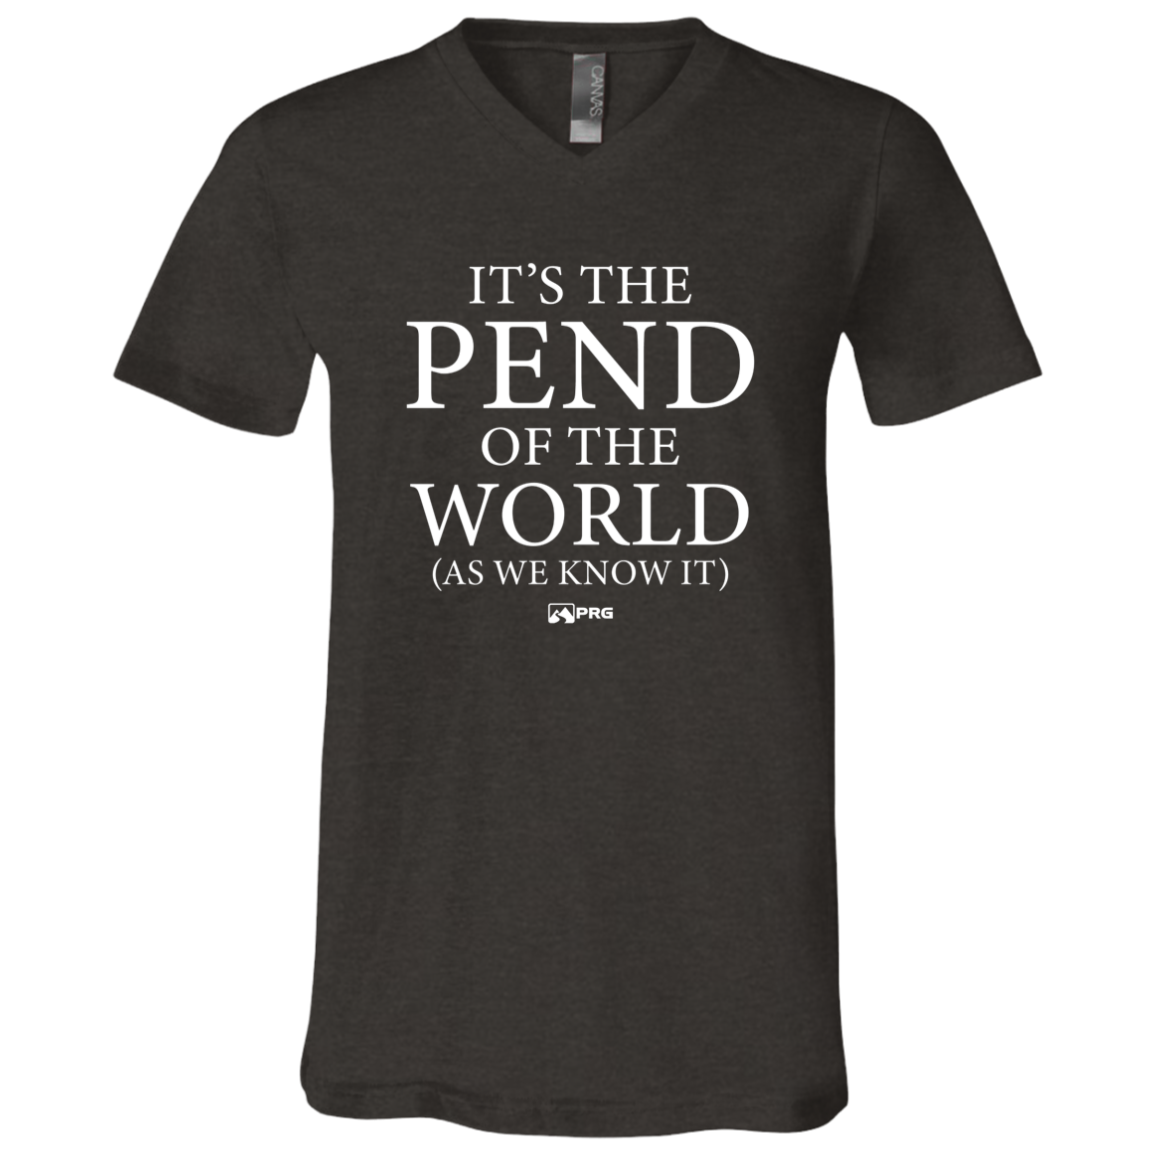 Pend of the World - V-Neck